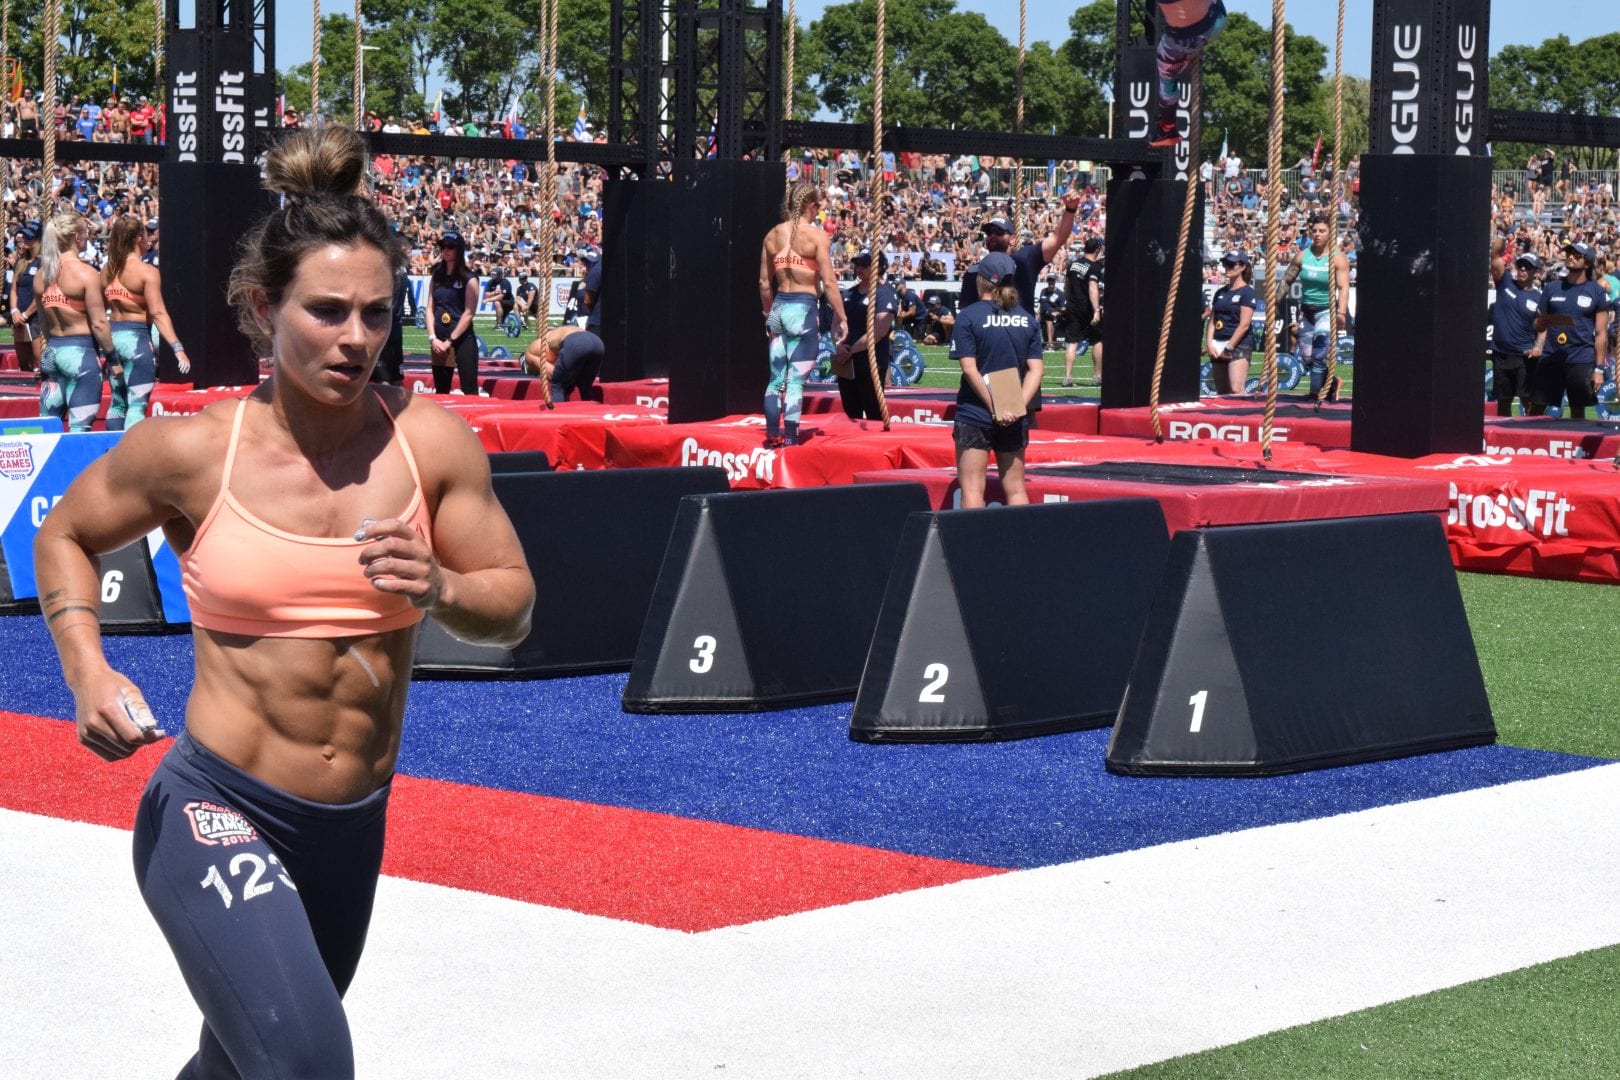 Jamie Greene takes a lap between rounds of legless rope climbs at the 2019 CrossFit Games